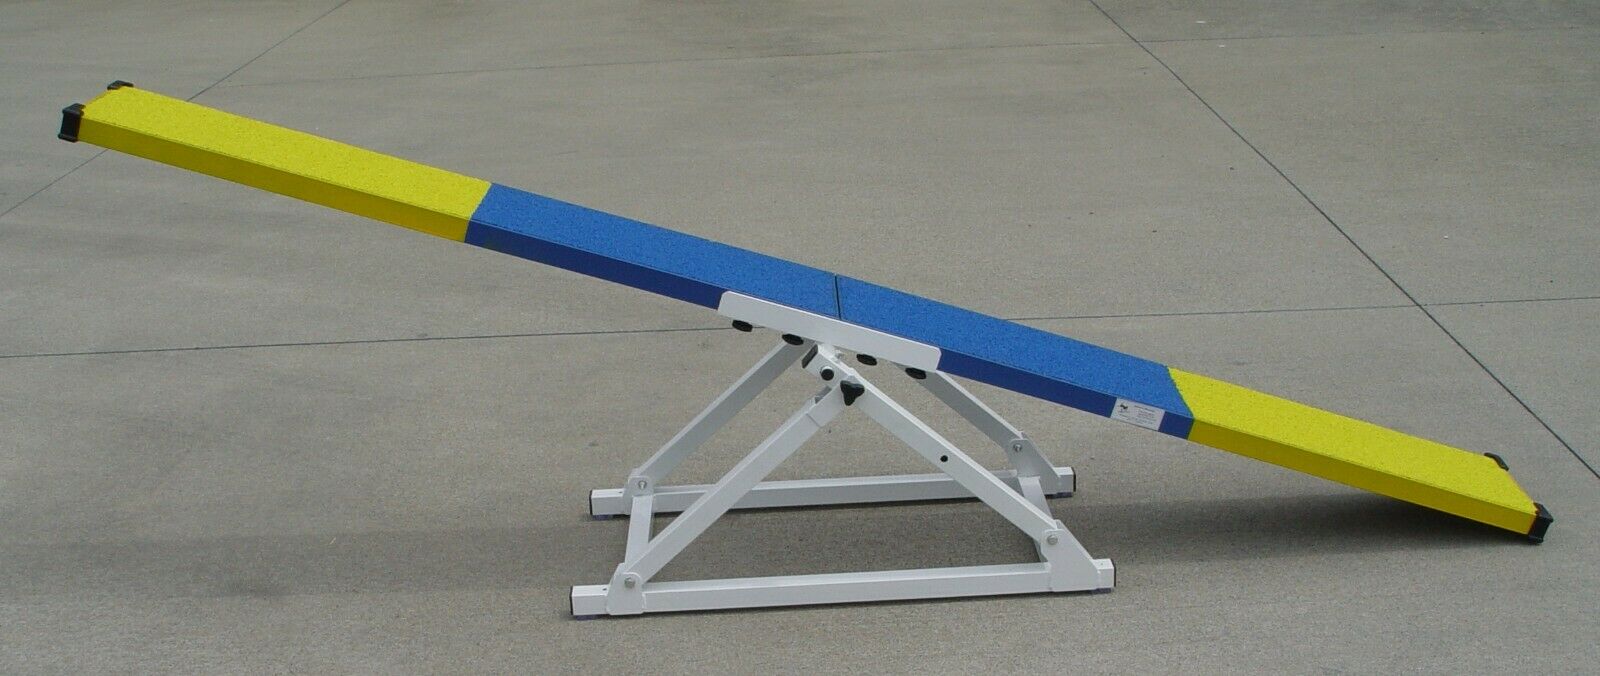 8' Dog Agility See-saw (teeter), Aluminum W/ Rubber Surface, Mini Puppy See-saw